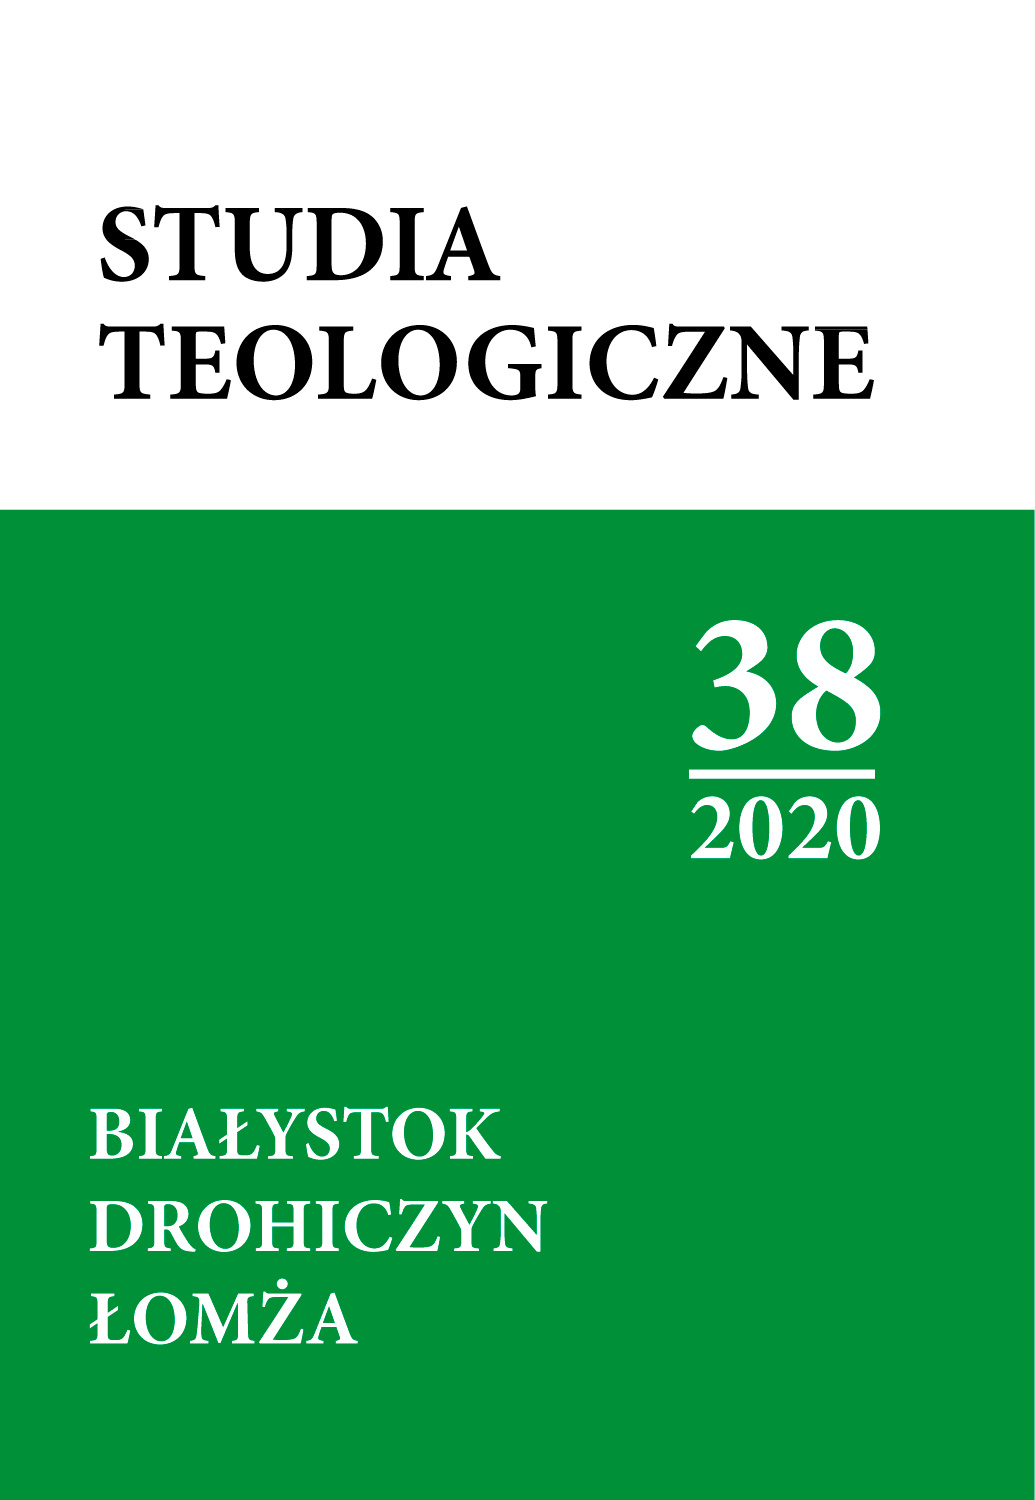 BIBLIOGRAPHY OF THE LITERATURE OF THE CLERGY OF THE EŁK DIOCESE IN 1992-2017 (PRIEST EDMUND PRZEKOP) Cover Image